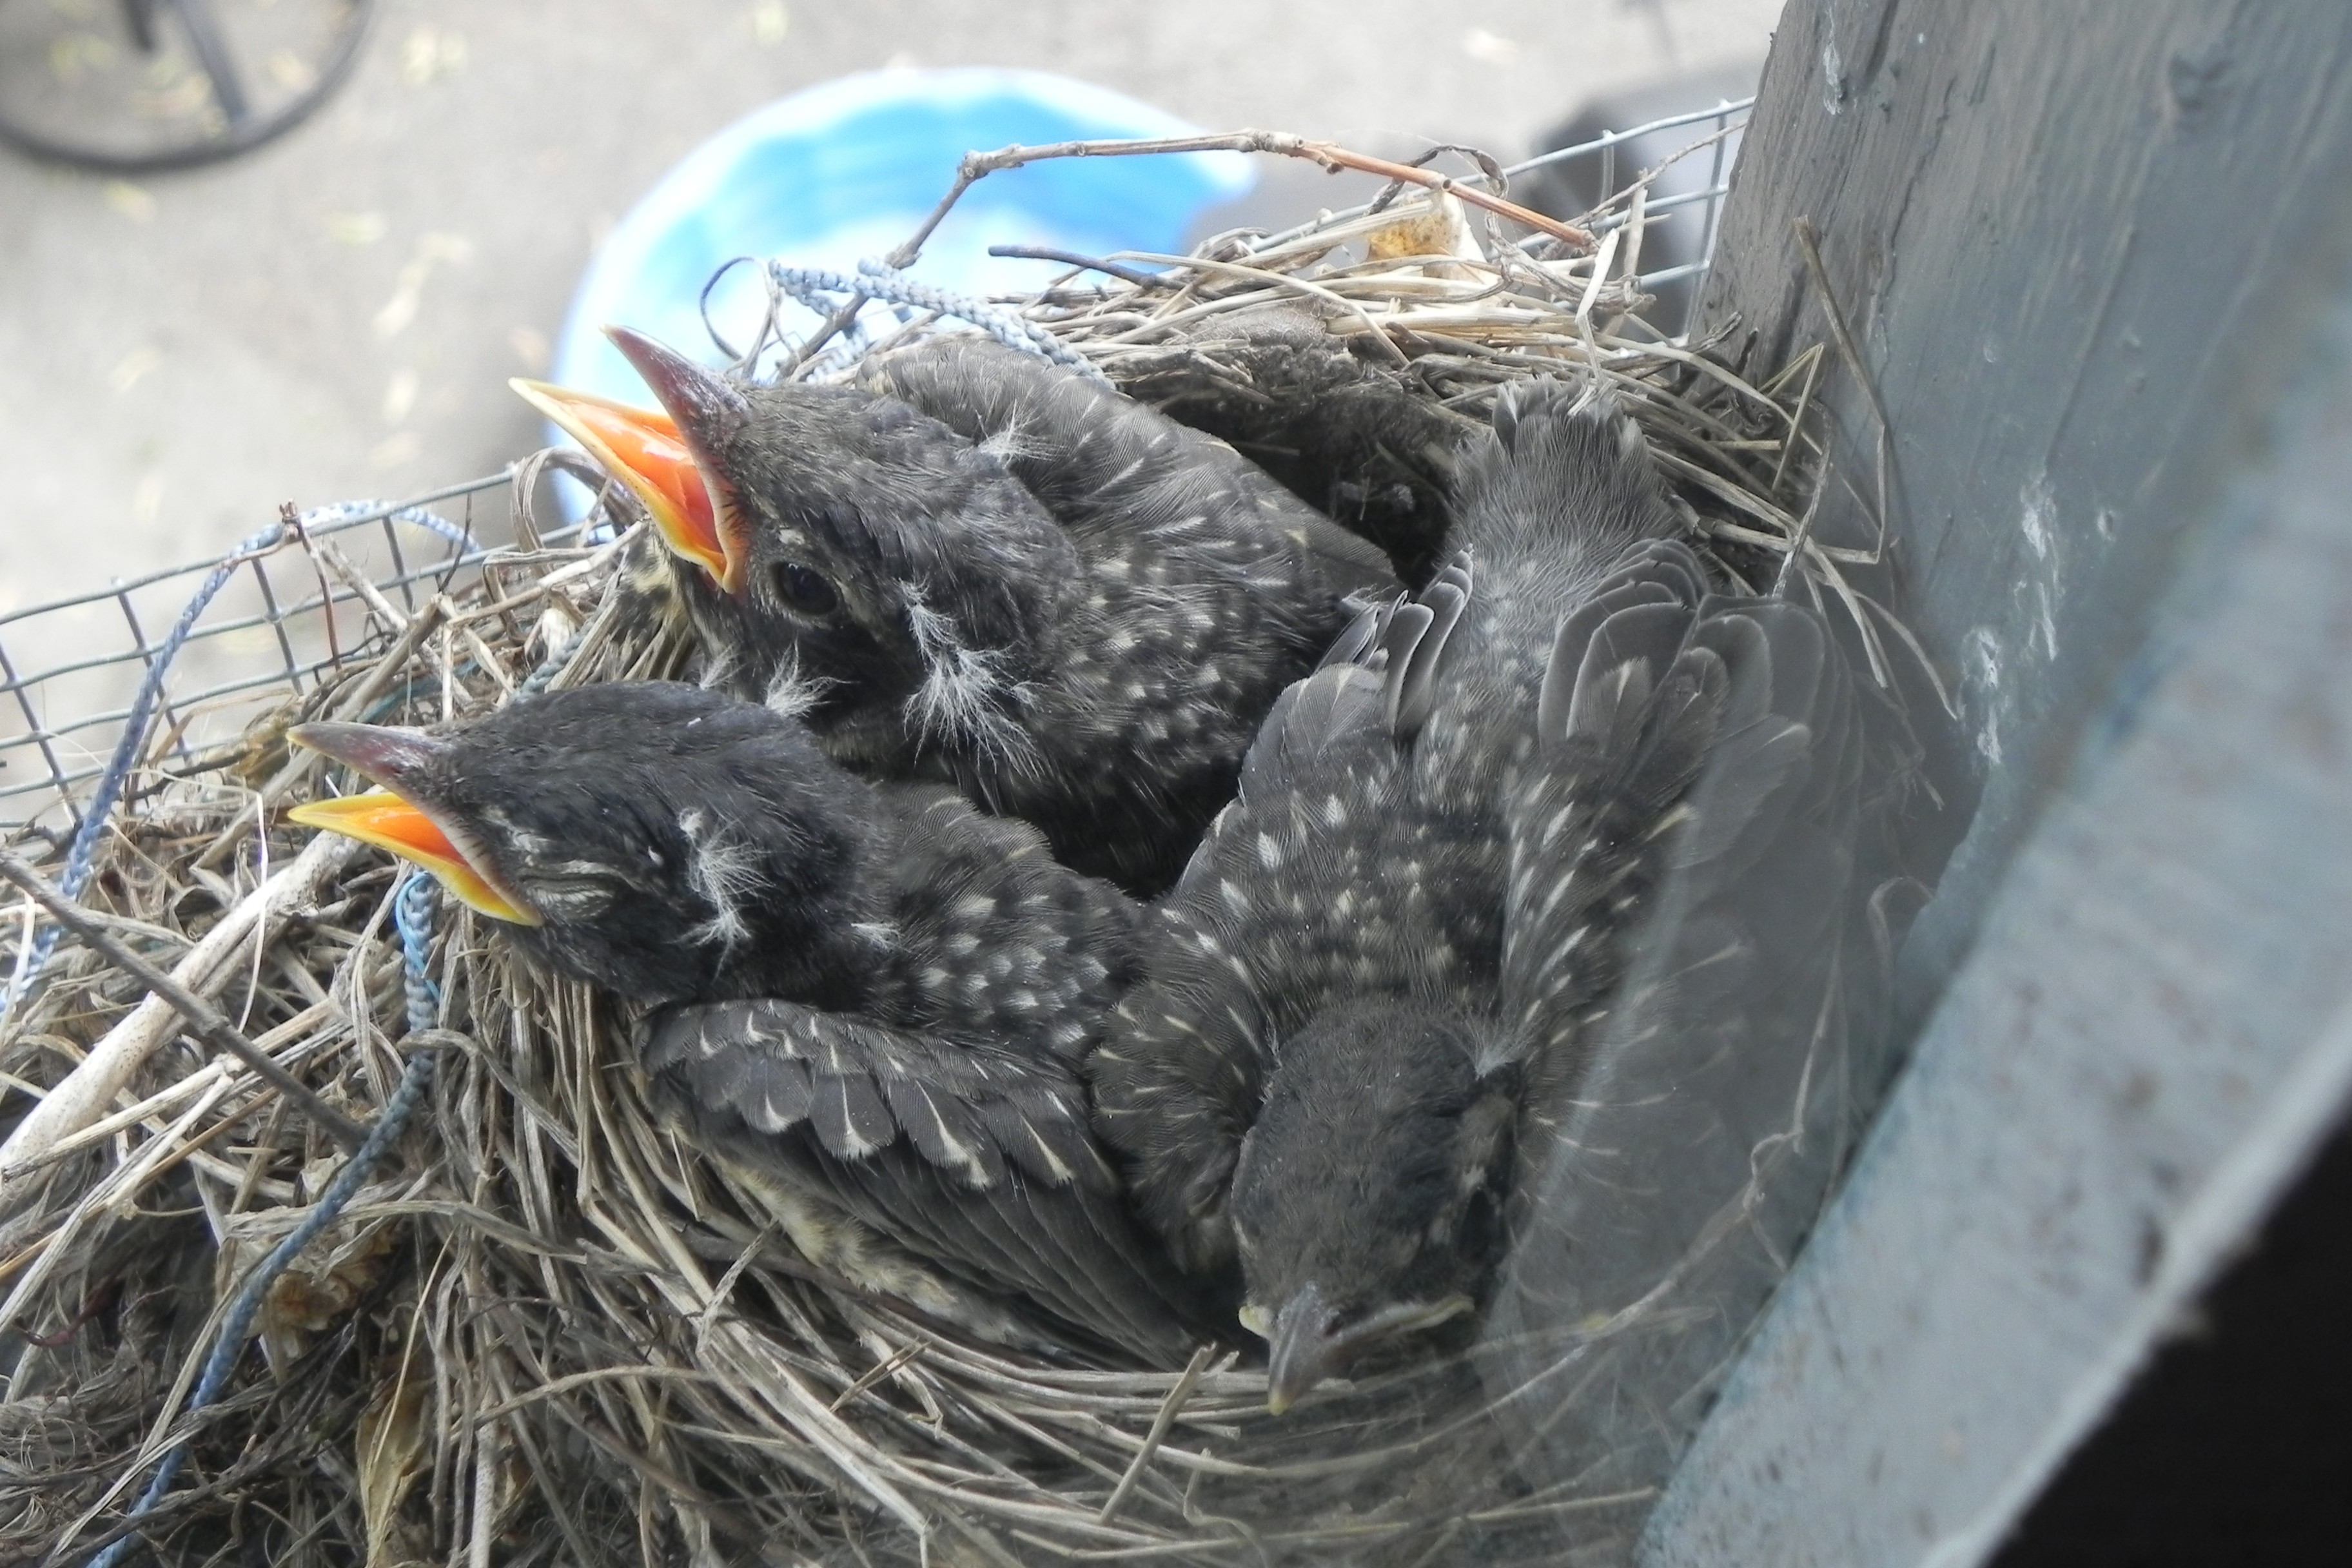 Mrs. Robin's babies - almost ready to leave the nest